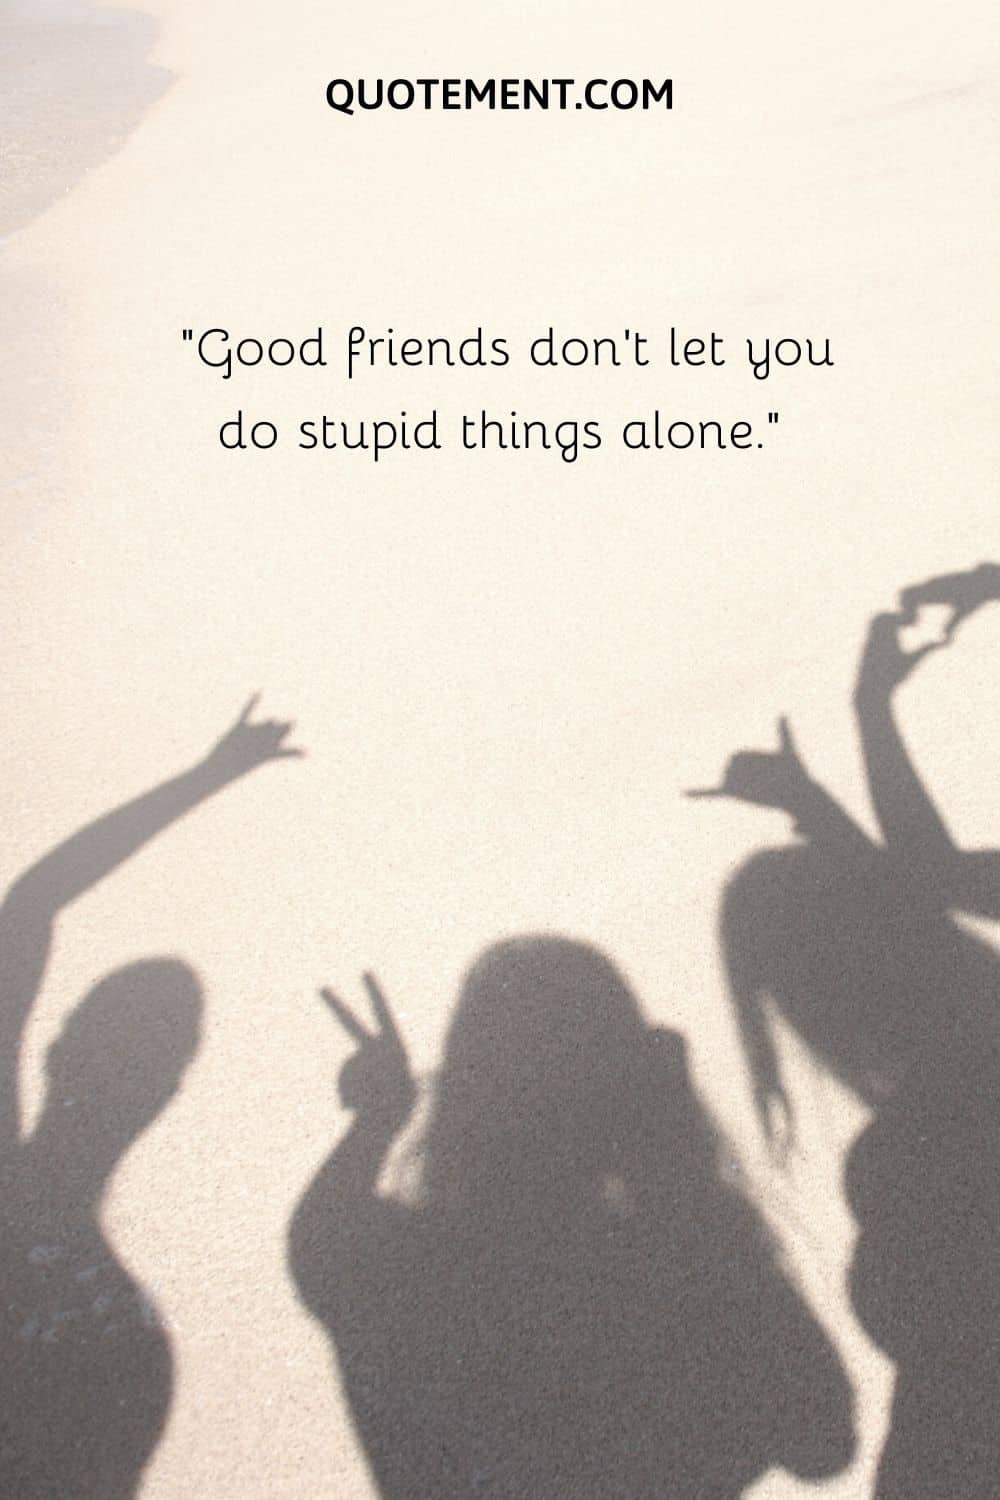 Good friends don’t let you do stupid things alone